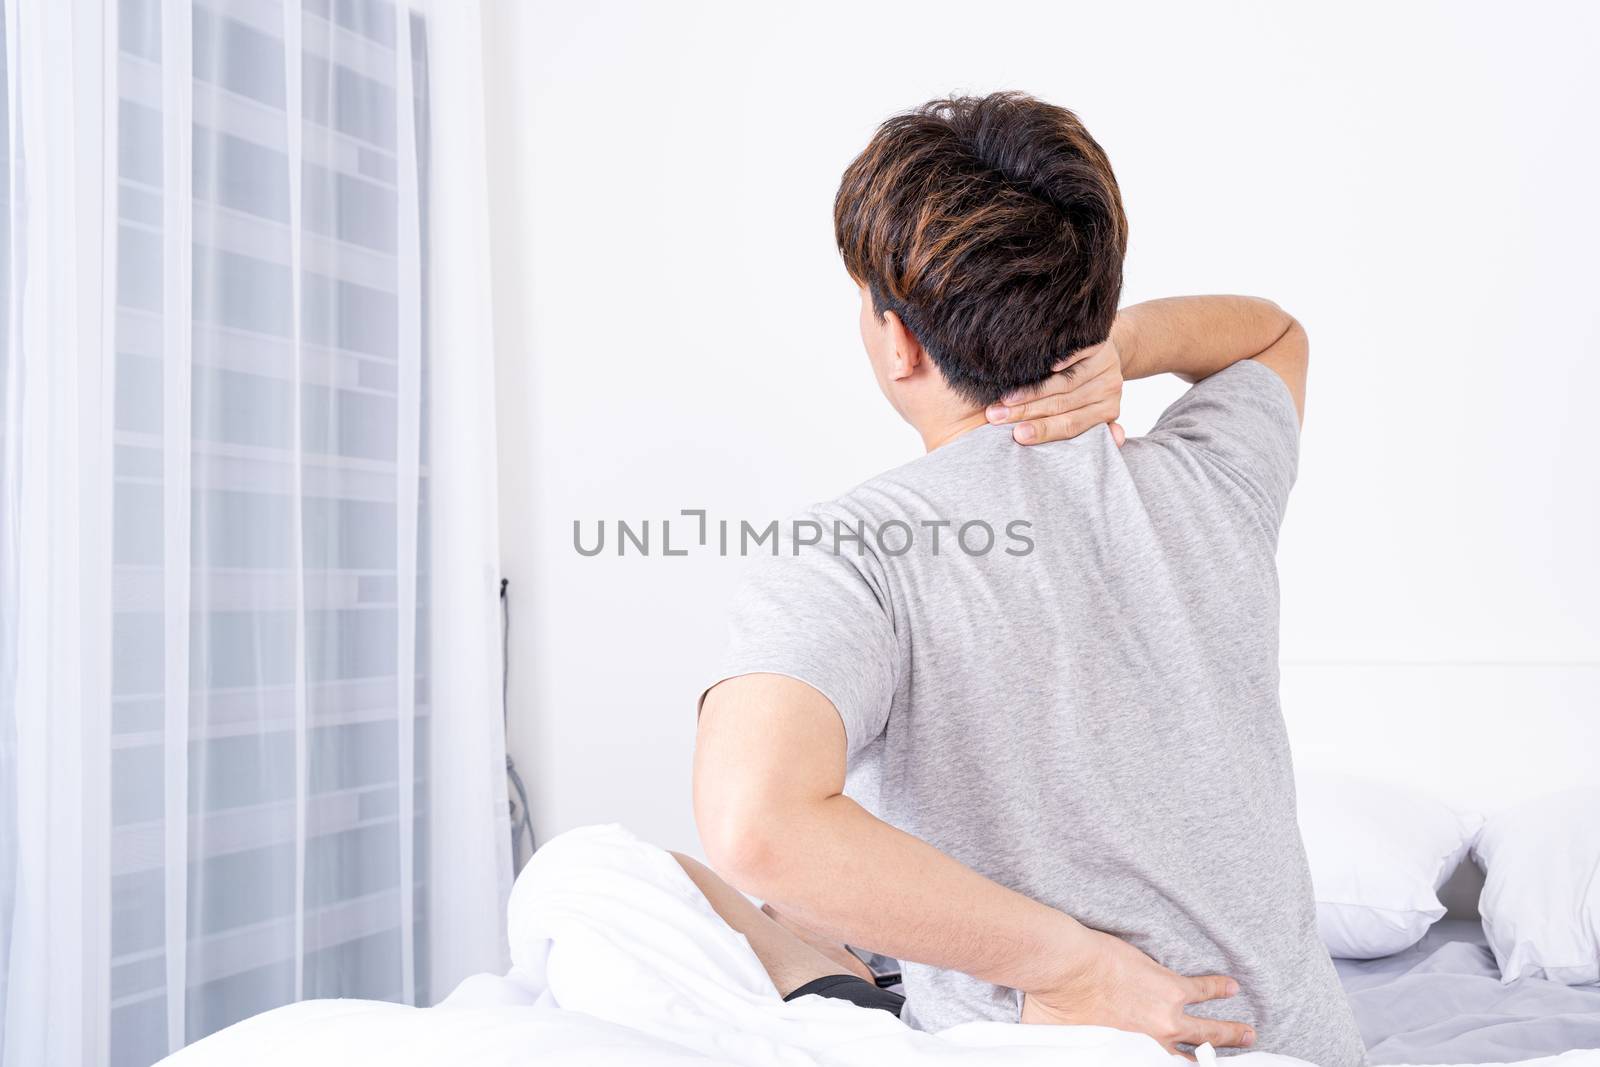 Young man suffering neck and back pain from uncomfortable bed. Healthcare medical or daily life concept.